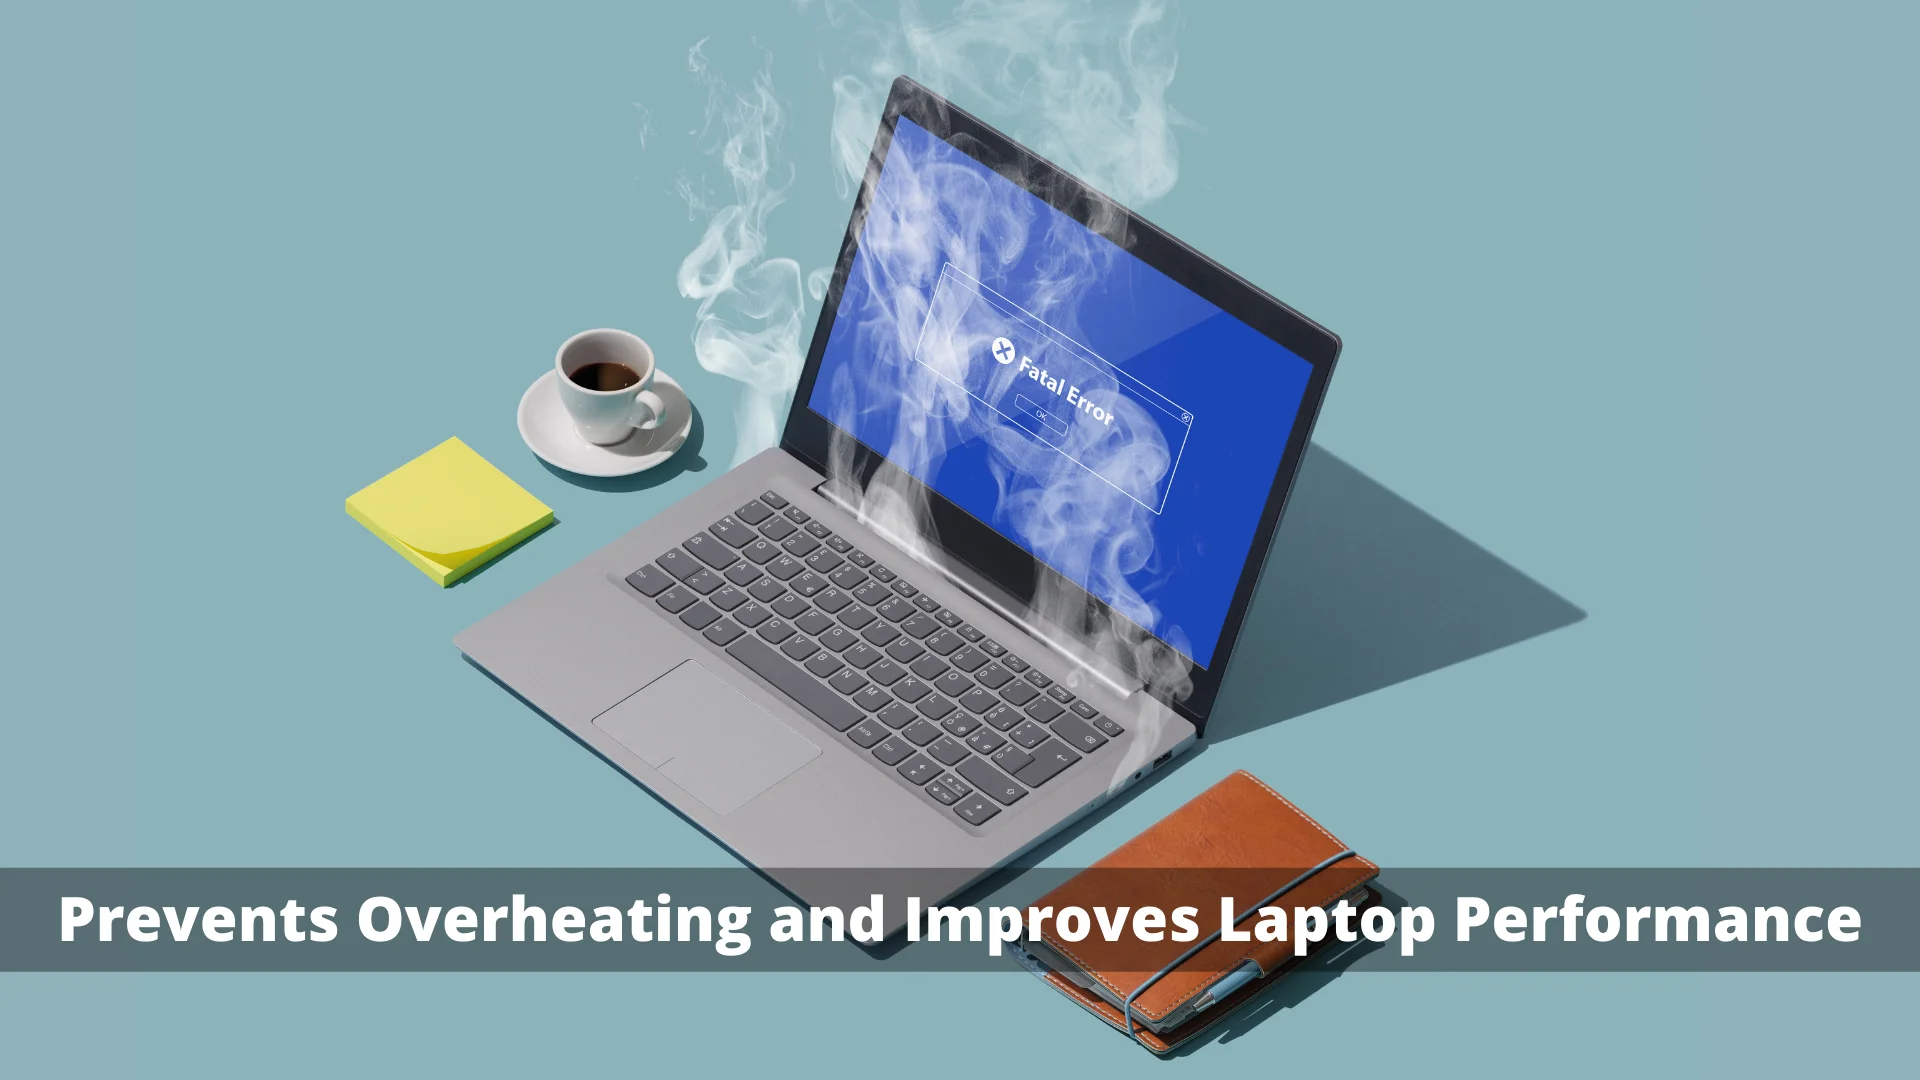 Prevents Overheating and Improves Laptop Performance